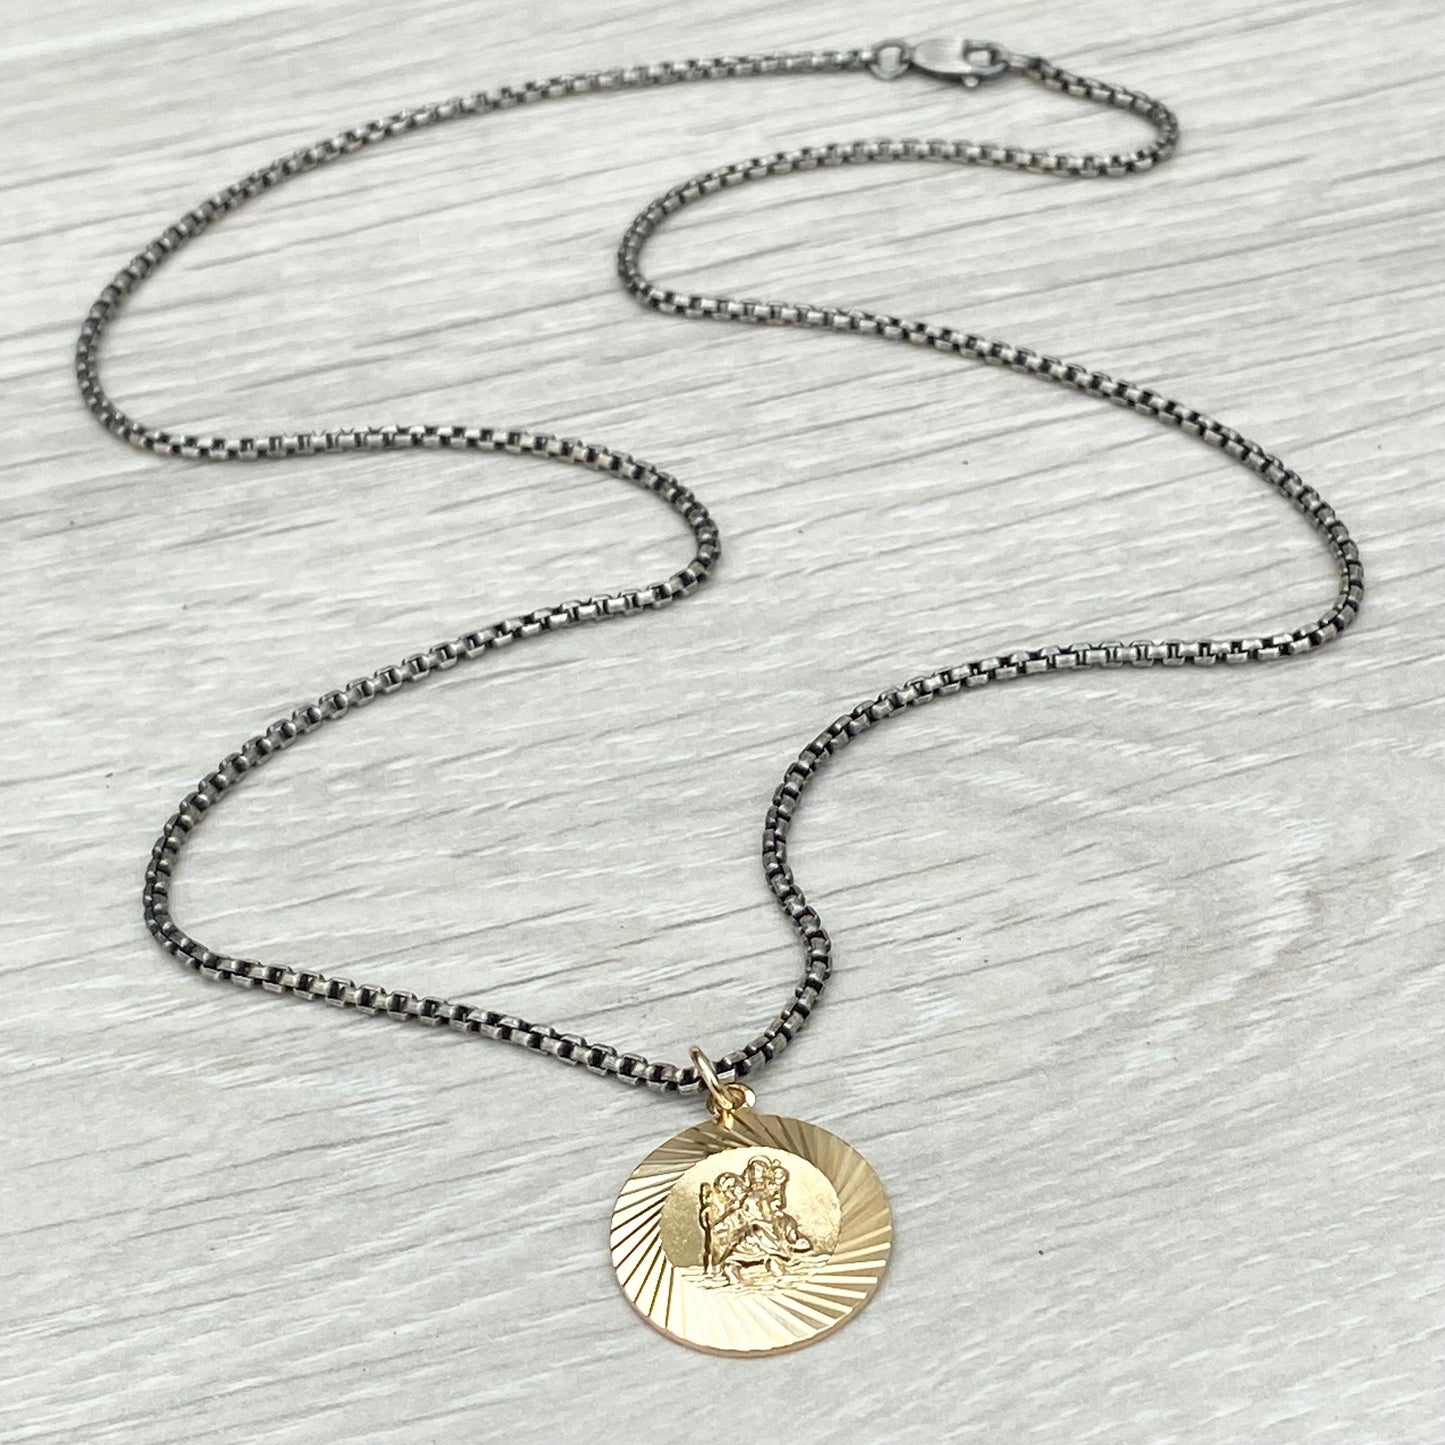 Vintage 9ct yellow gold Saint Christopher pendant - 9k yellow gold - New oxidised silver 2mm round box chain - British vintage jewellery